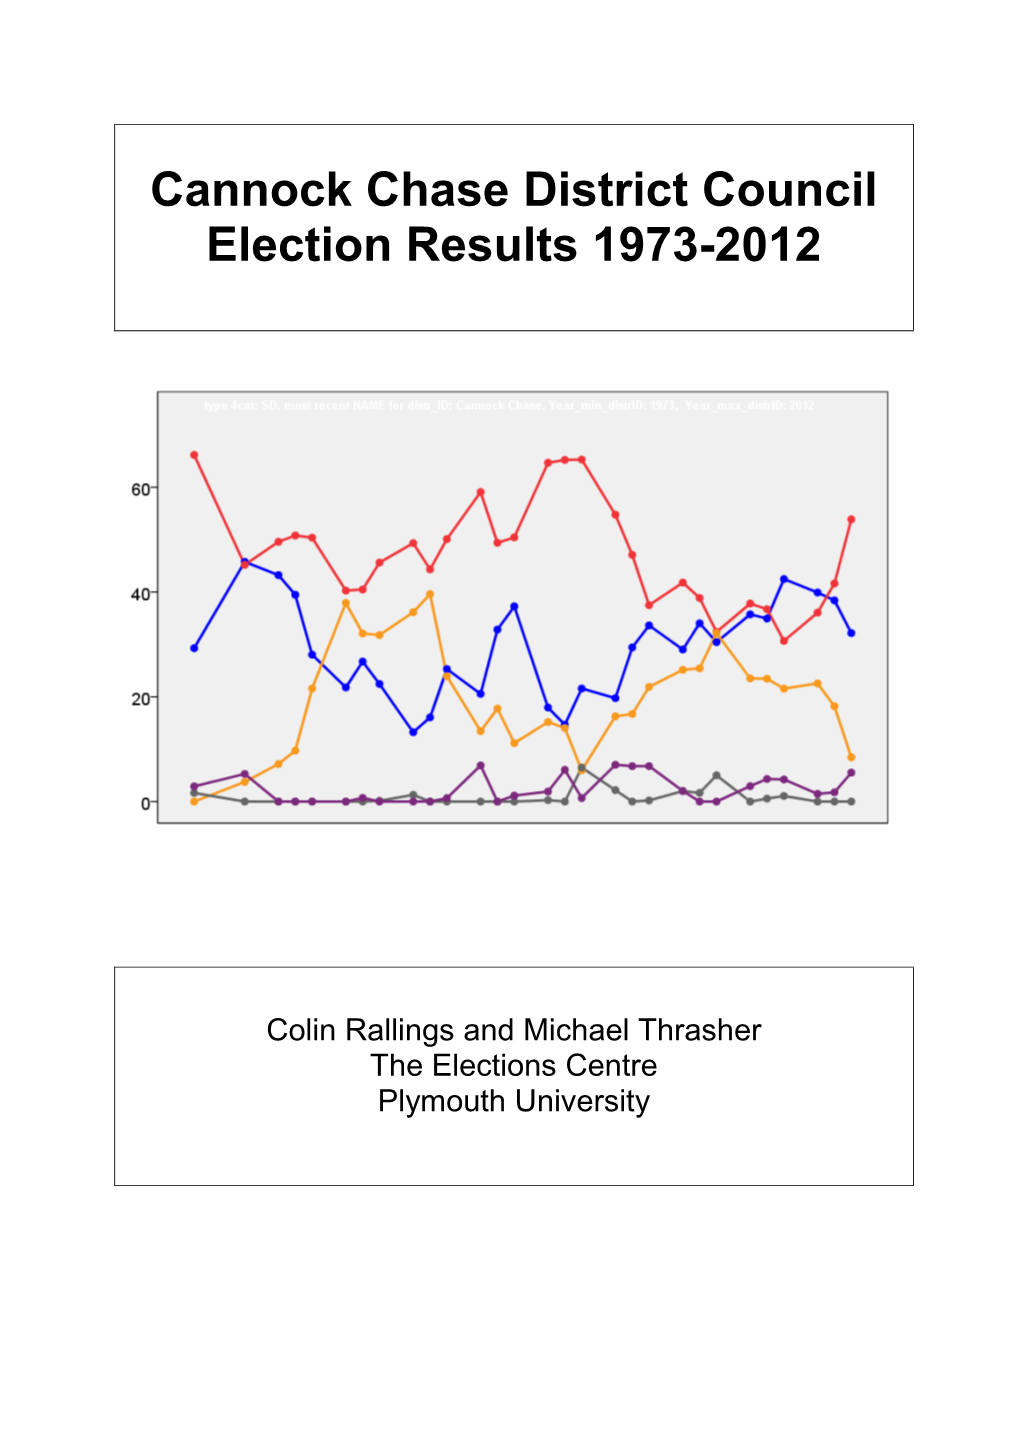 Cannock Chase District Council Election Results 1973-2012